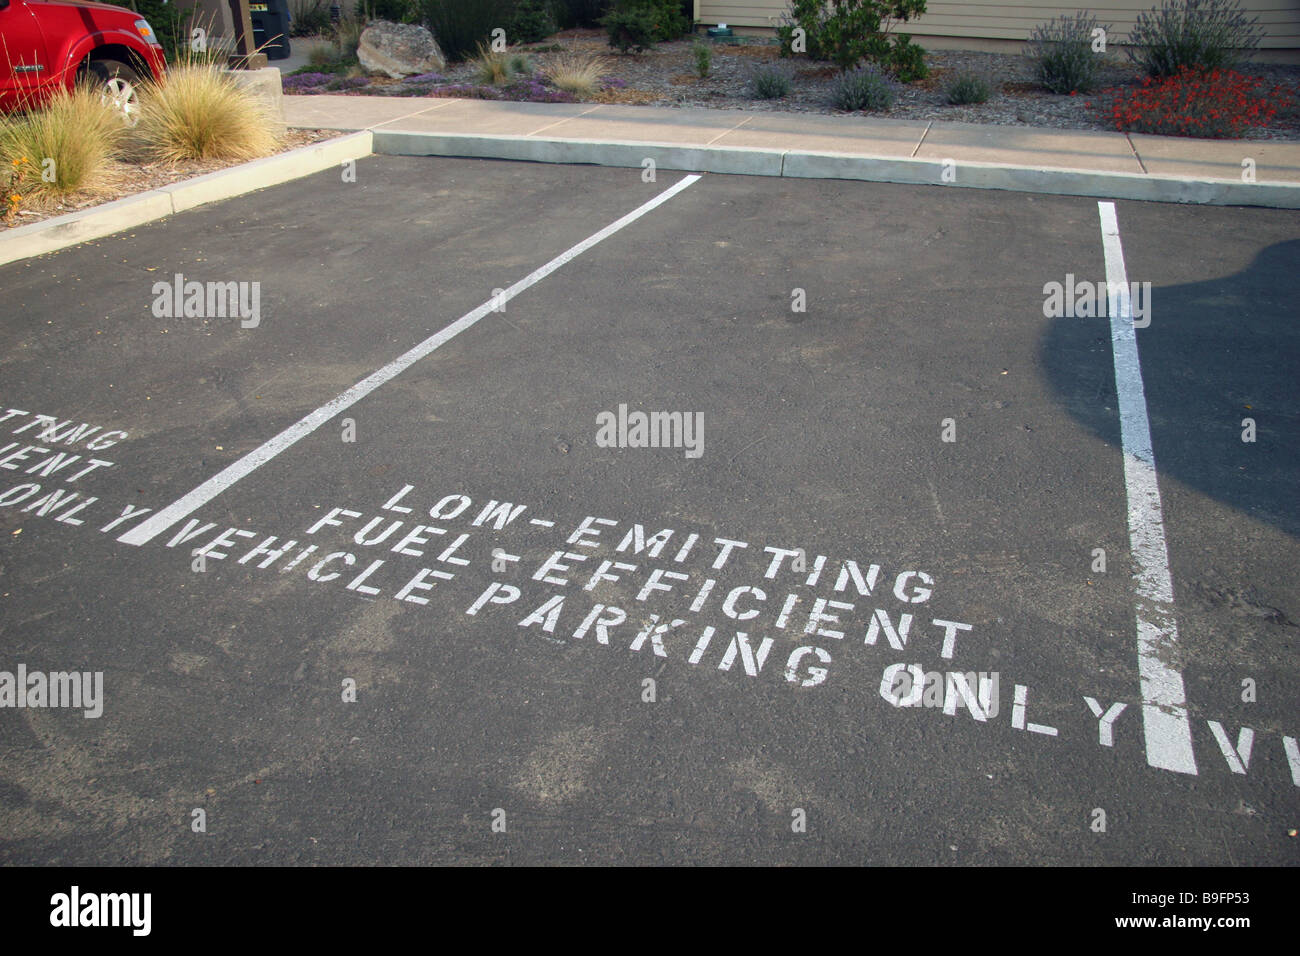 Parking spots designated for Low Emitting Fuel Efficient cars at the GAIA Napa Valley Hotel, American Canyon, California. Stock Photo